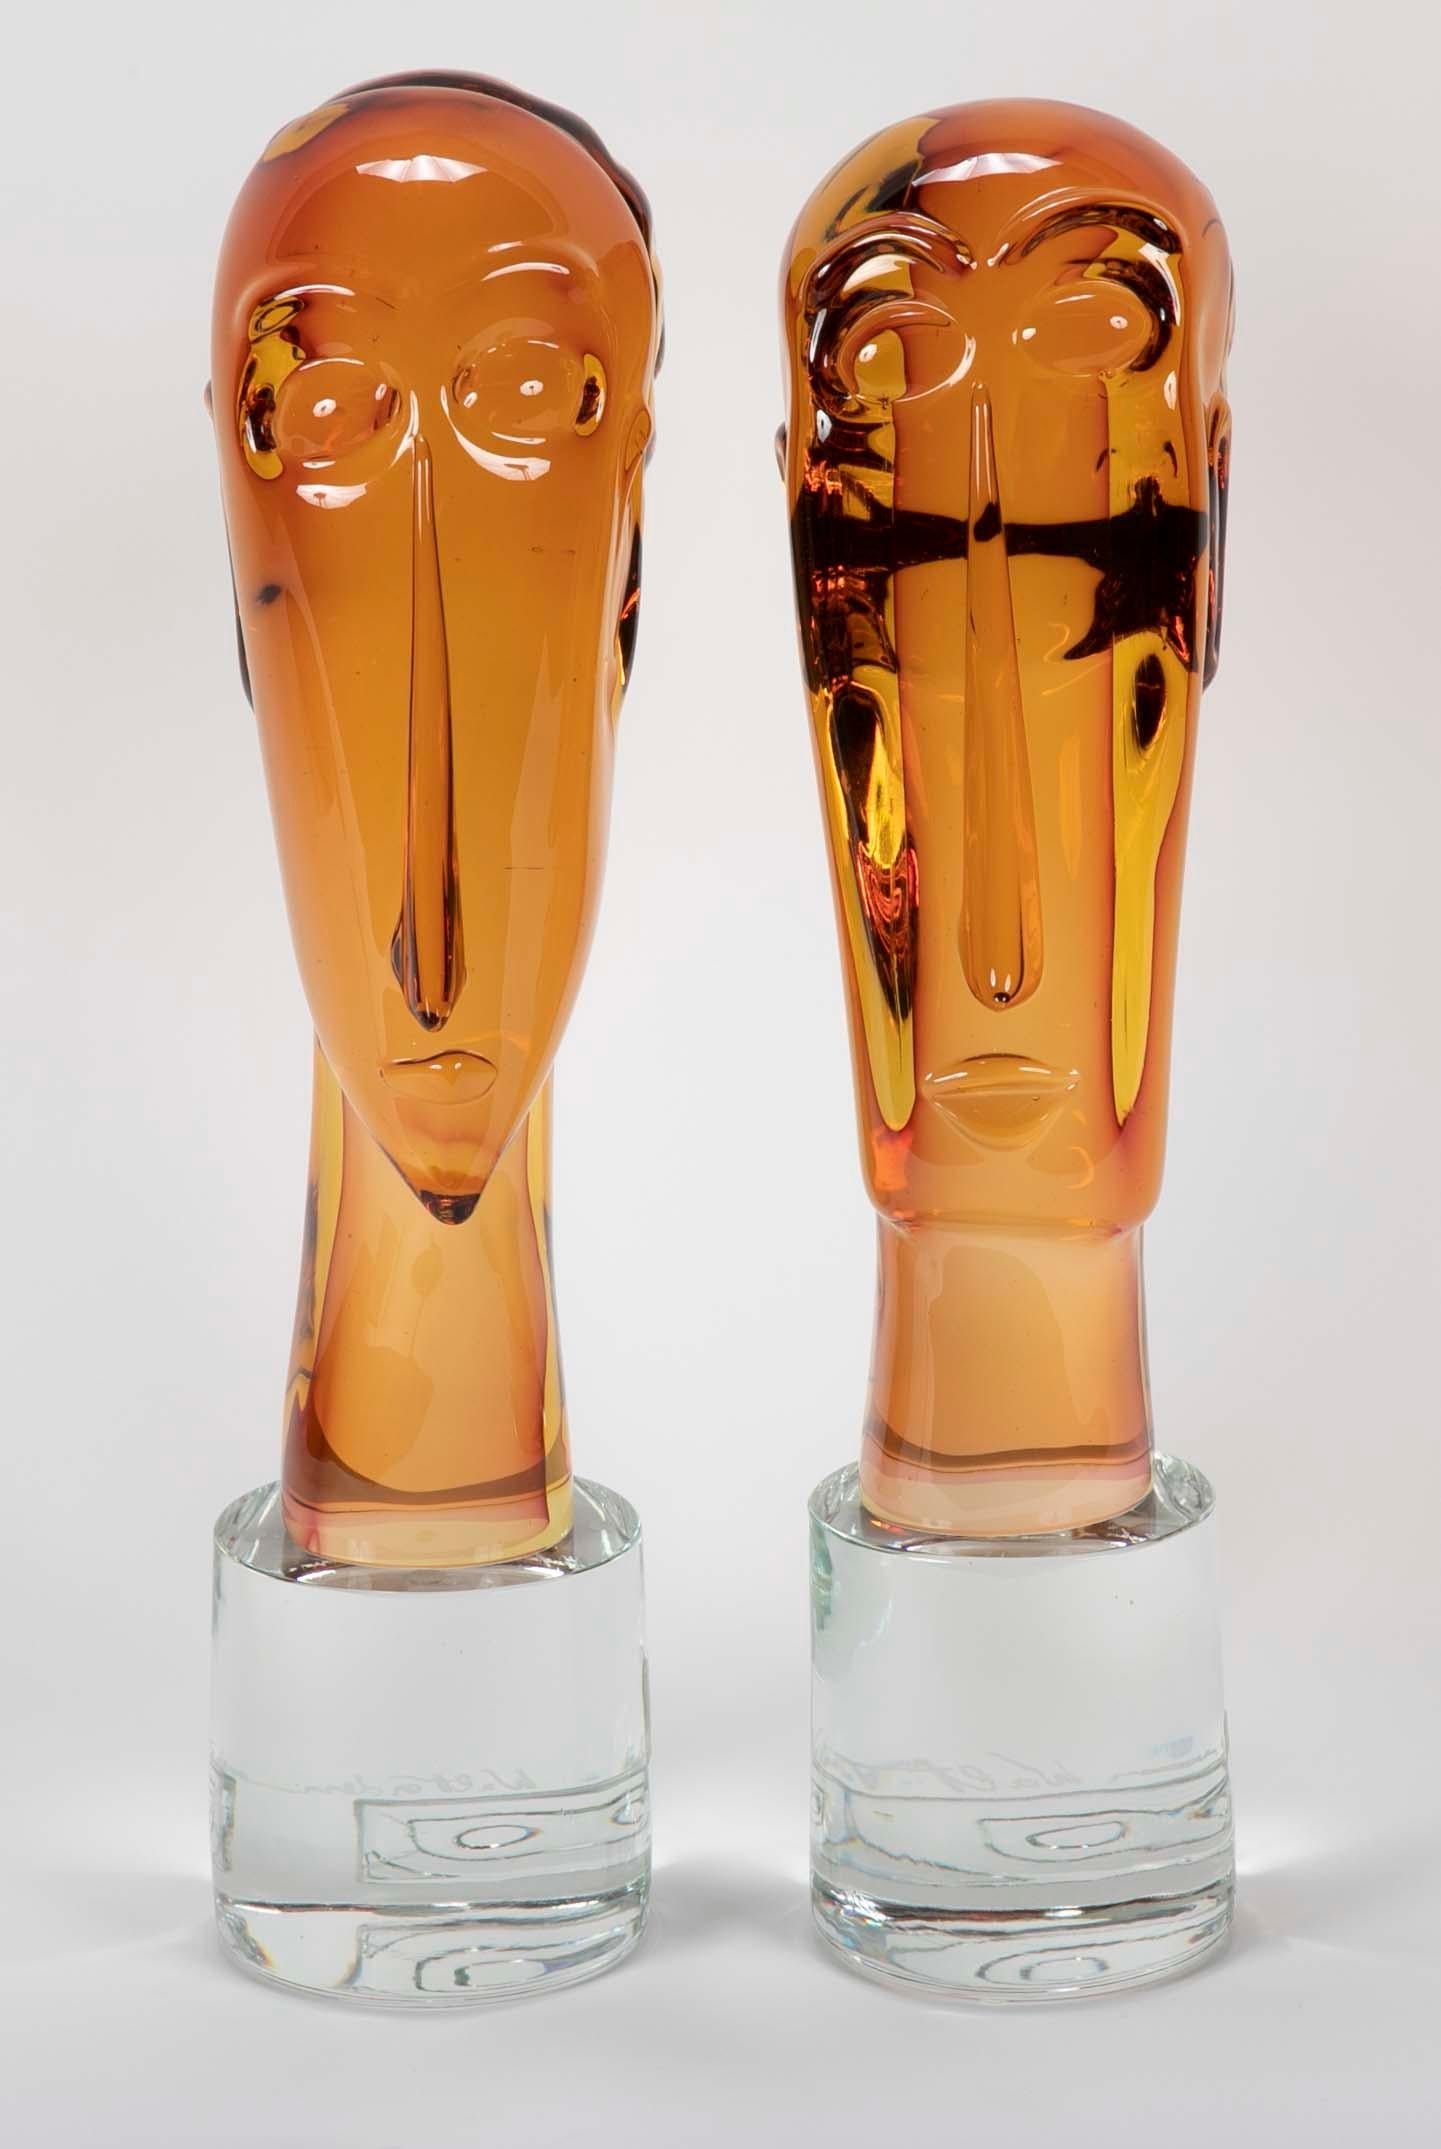 A pair of beautiful Murano blown glass figures designed by Walter Furlan. Glass blown by his son, Mario Furlan in homage to Amedeo Clemente Modigliani. Signed by all three, 

circa 2016.